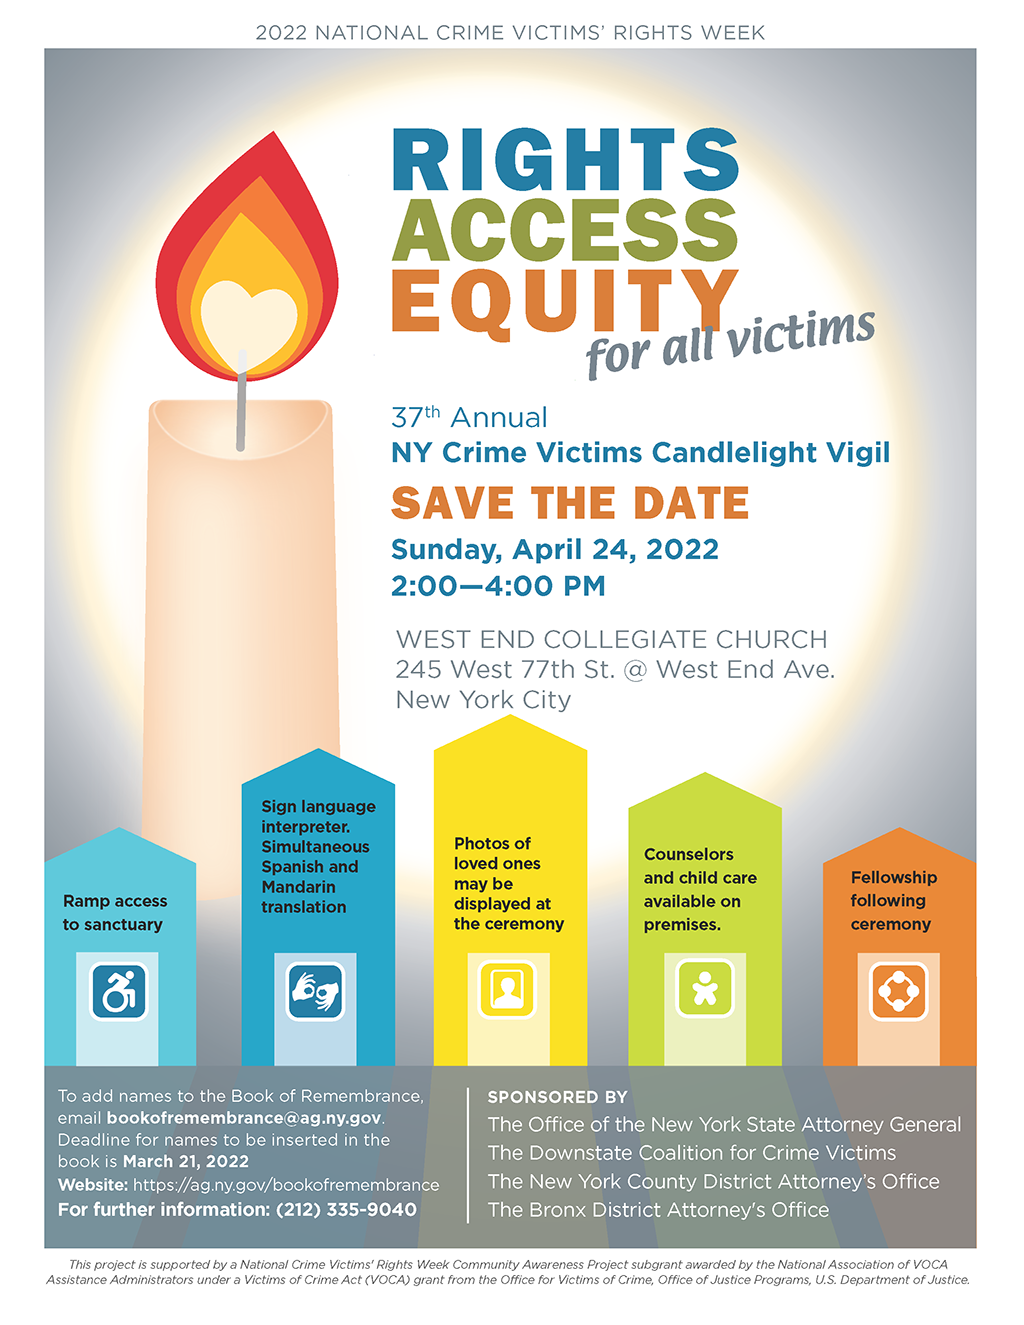 Title of Rights Access Equity for all Victims. NY Crime Victim’s Candlelight Vigil Sunday, April 24, 2022, 2:00 pm to 4:00 pm at West End Collegiate Church, 245 West 77th Street at West End Avenue, NYC. Images of large candle and icons describing event acess.